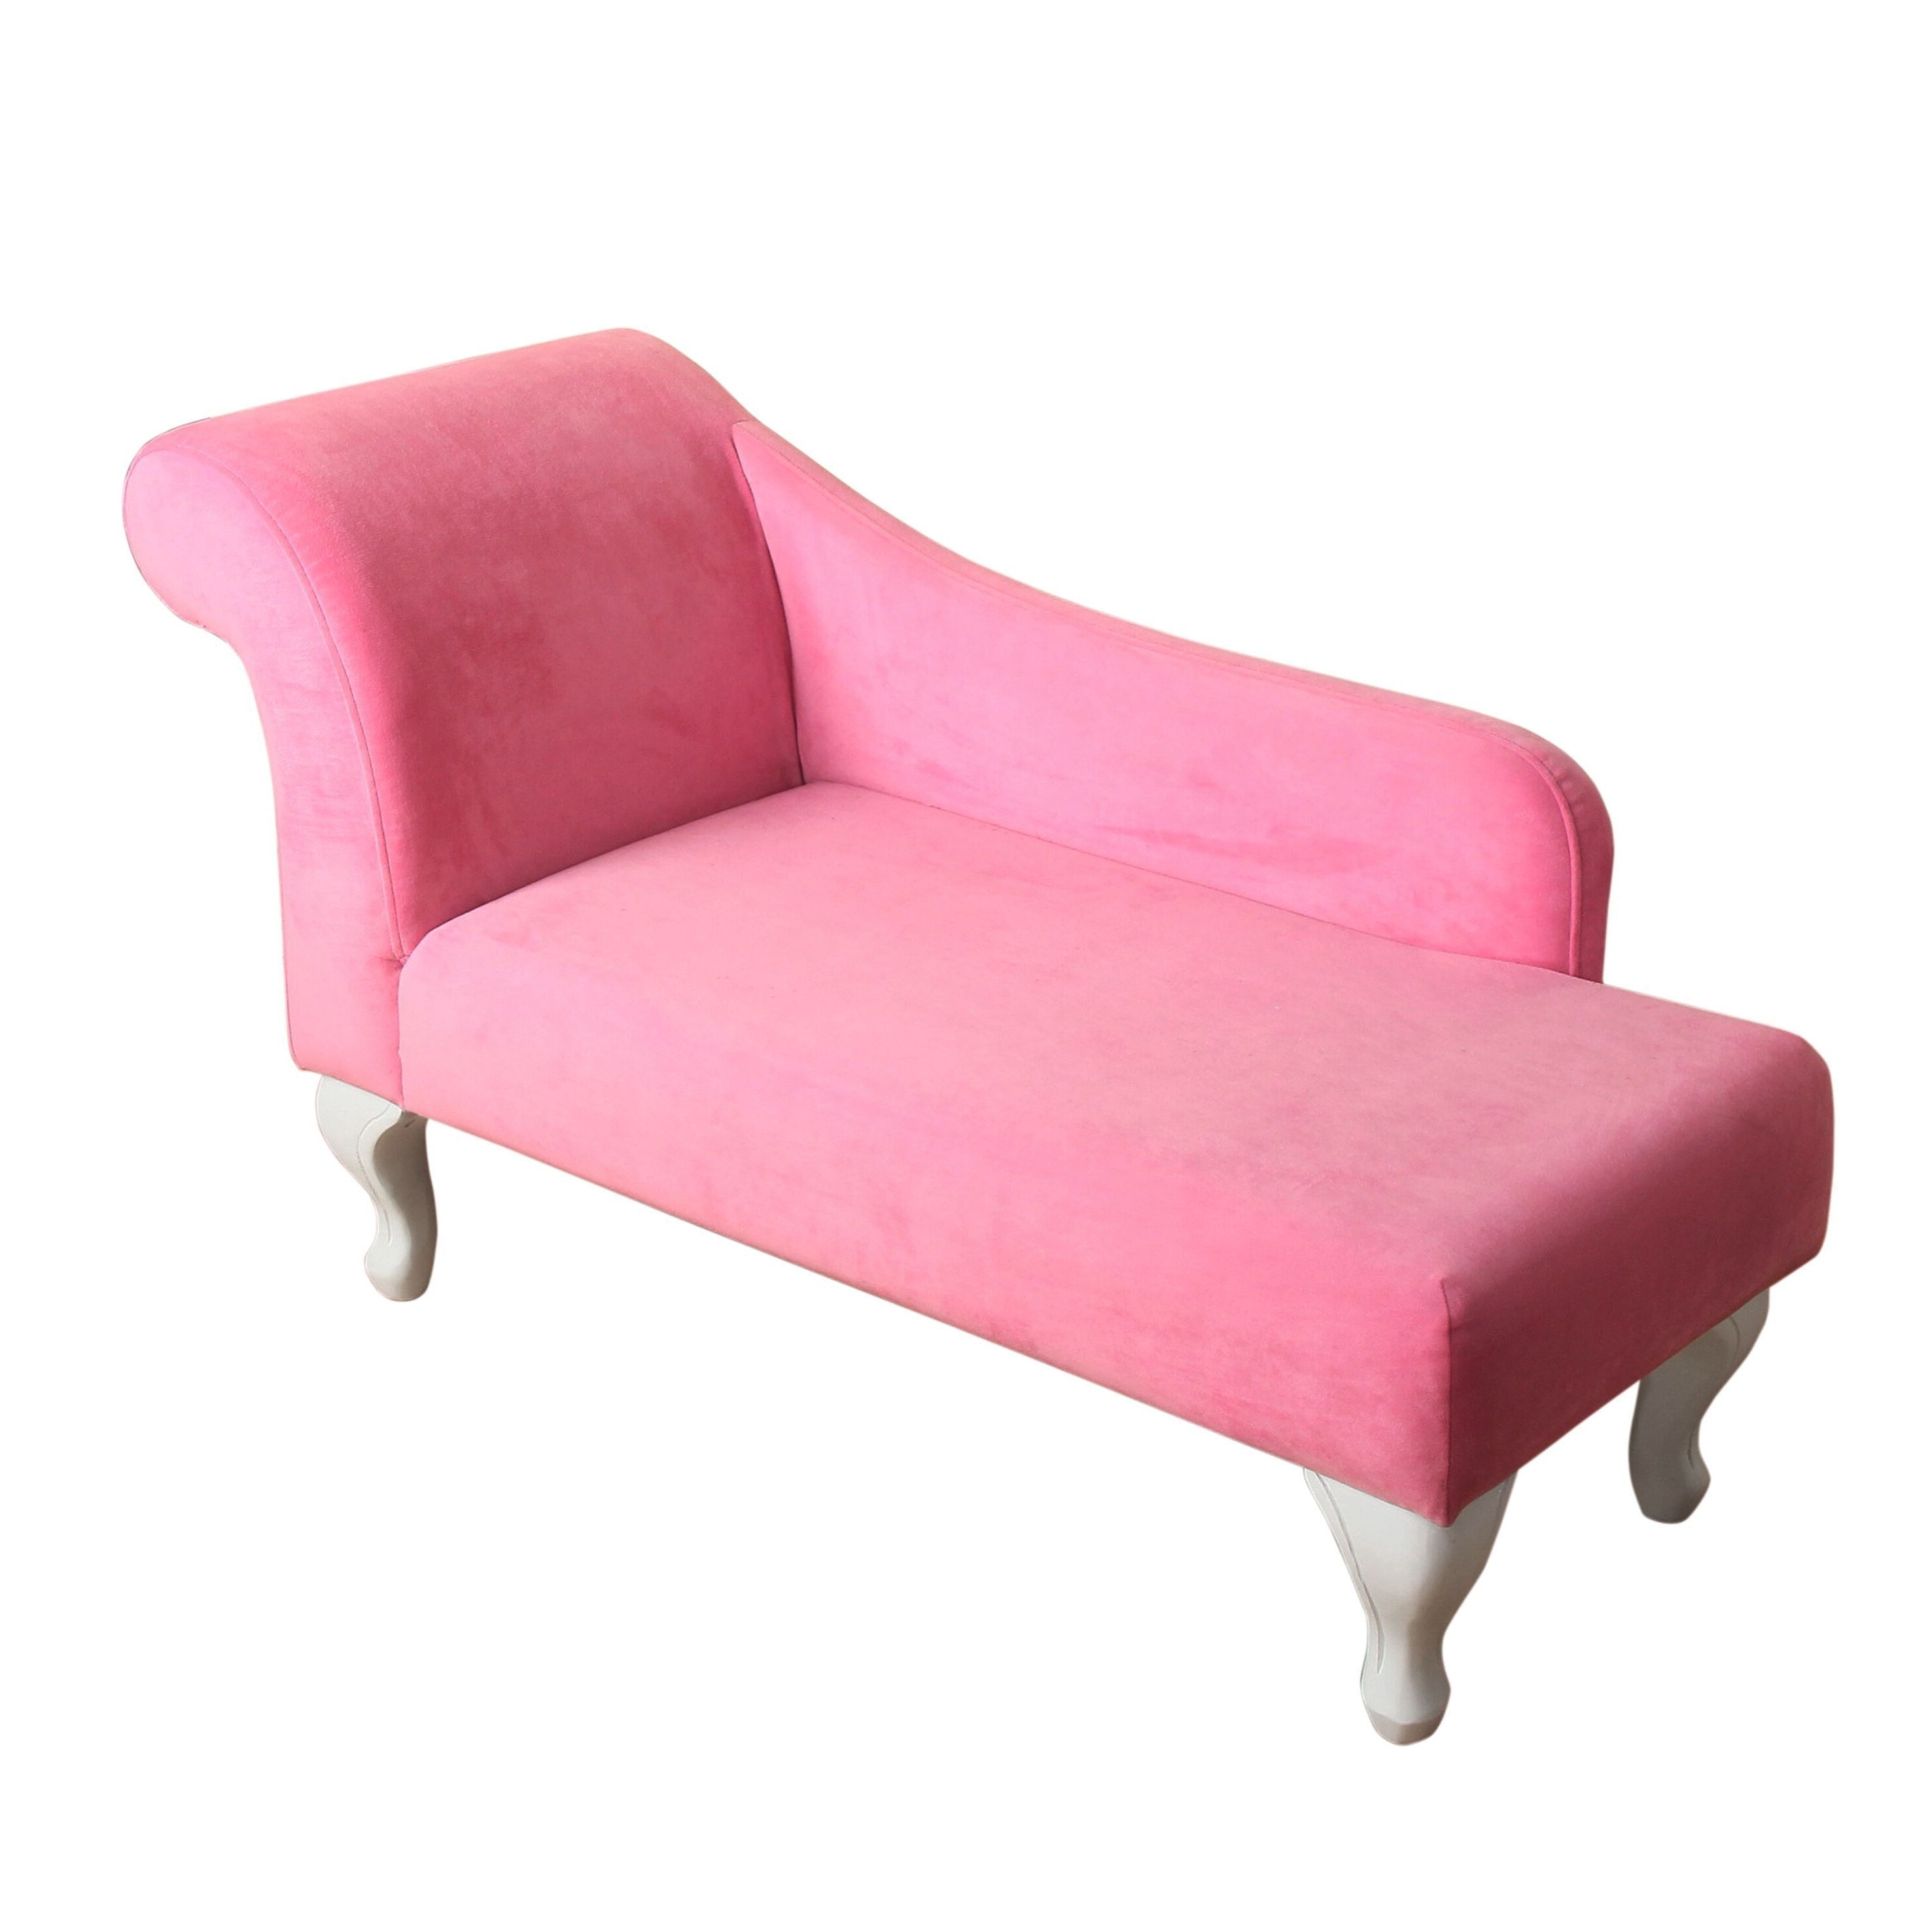 Homepop Juvenile Chaise Lounge In Pink Velvet – Free Shipping Throughout Well Known Pink Chaise Lounges (View 4 of 15)